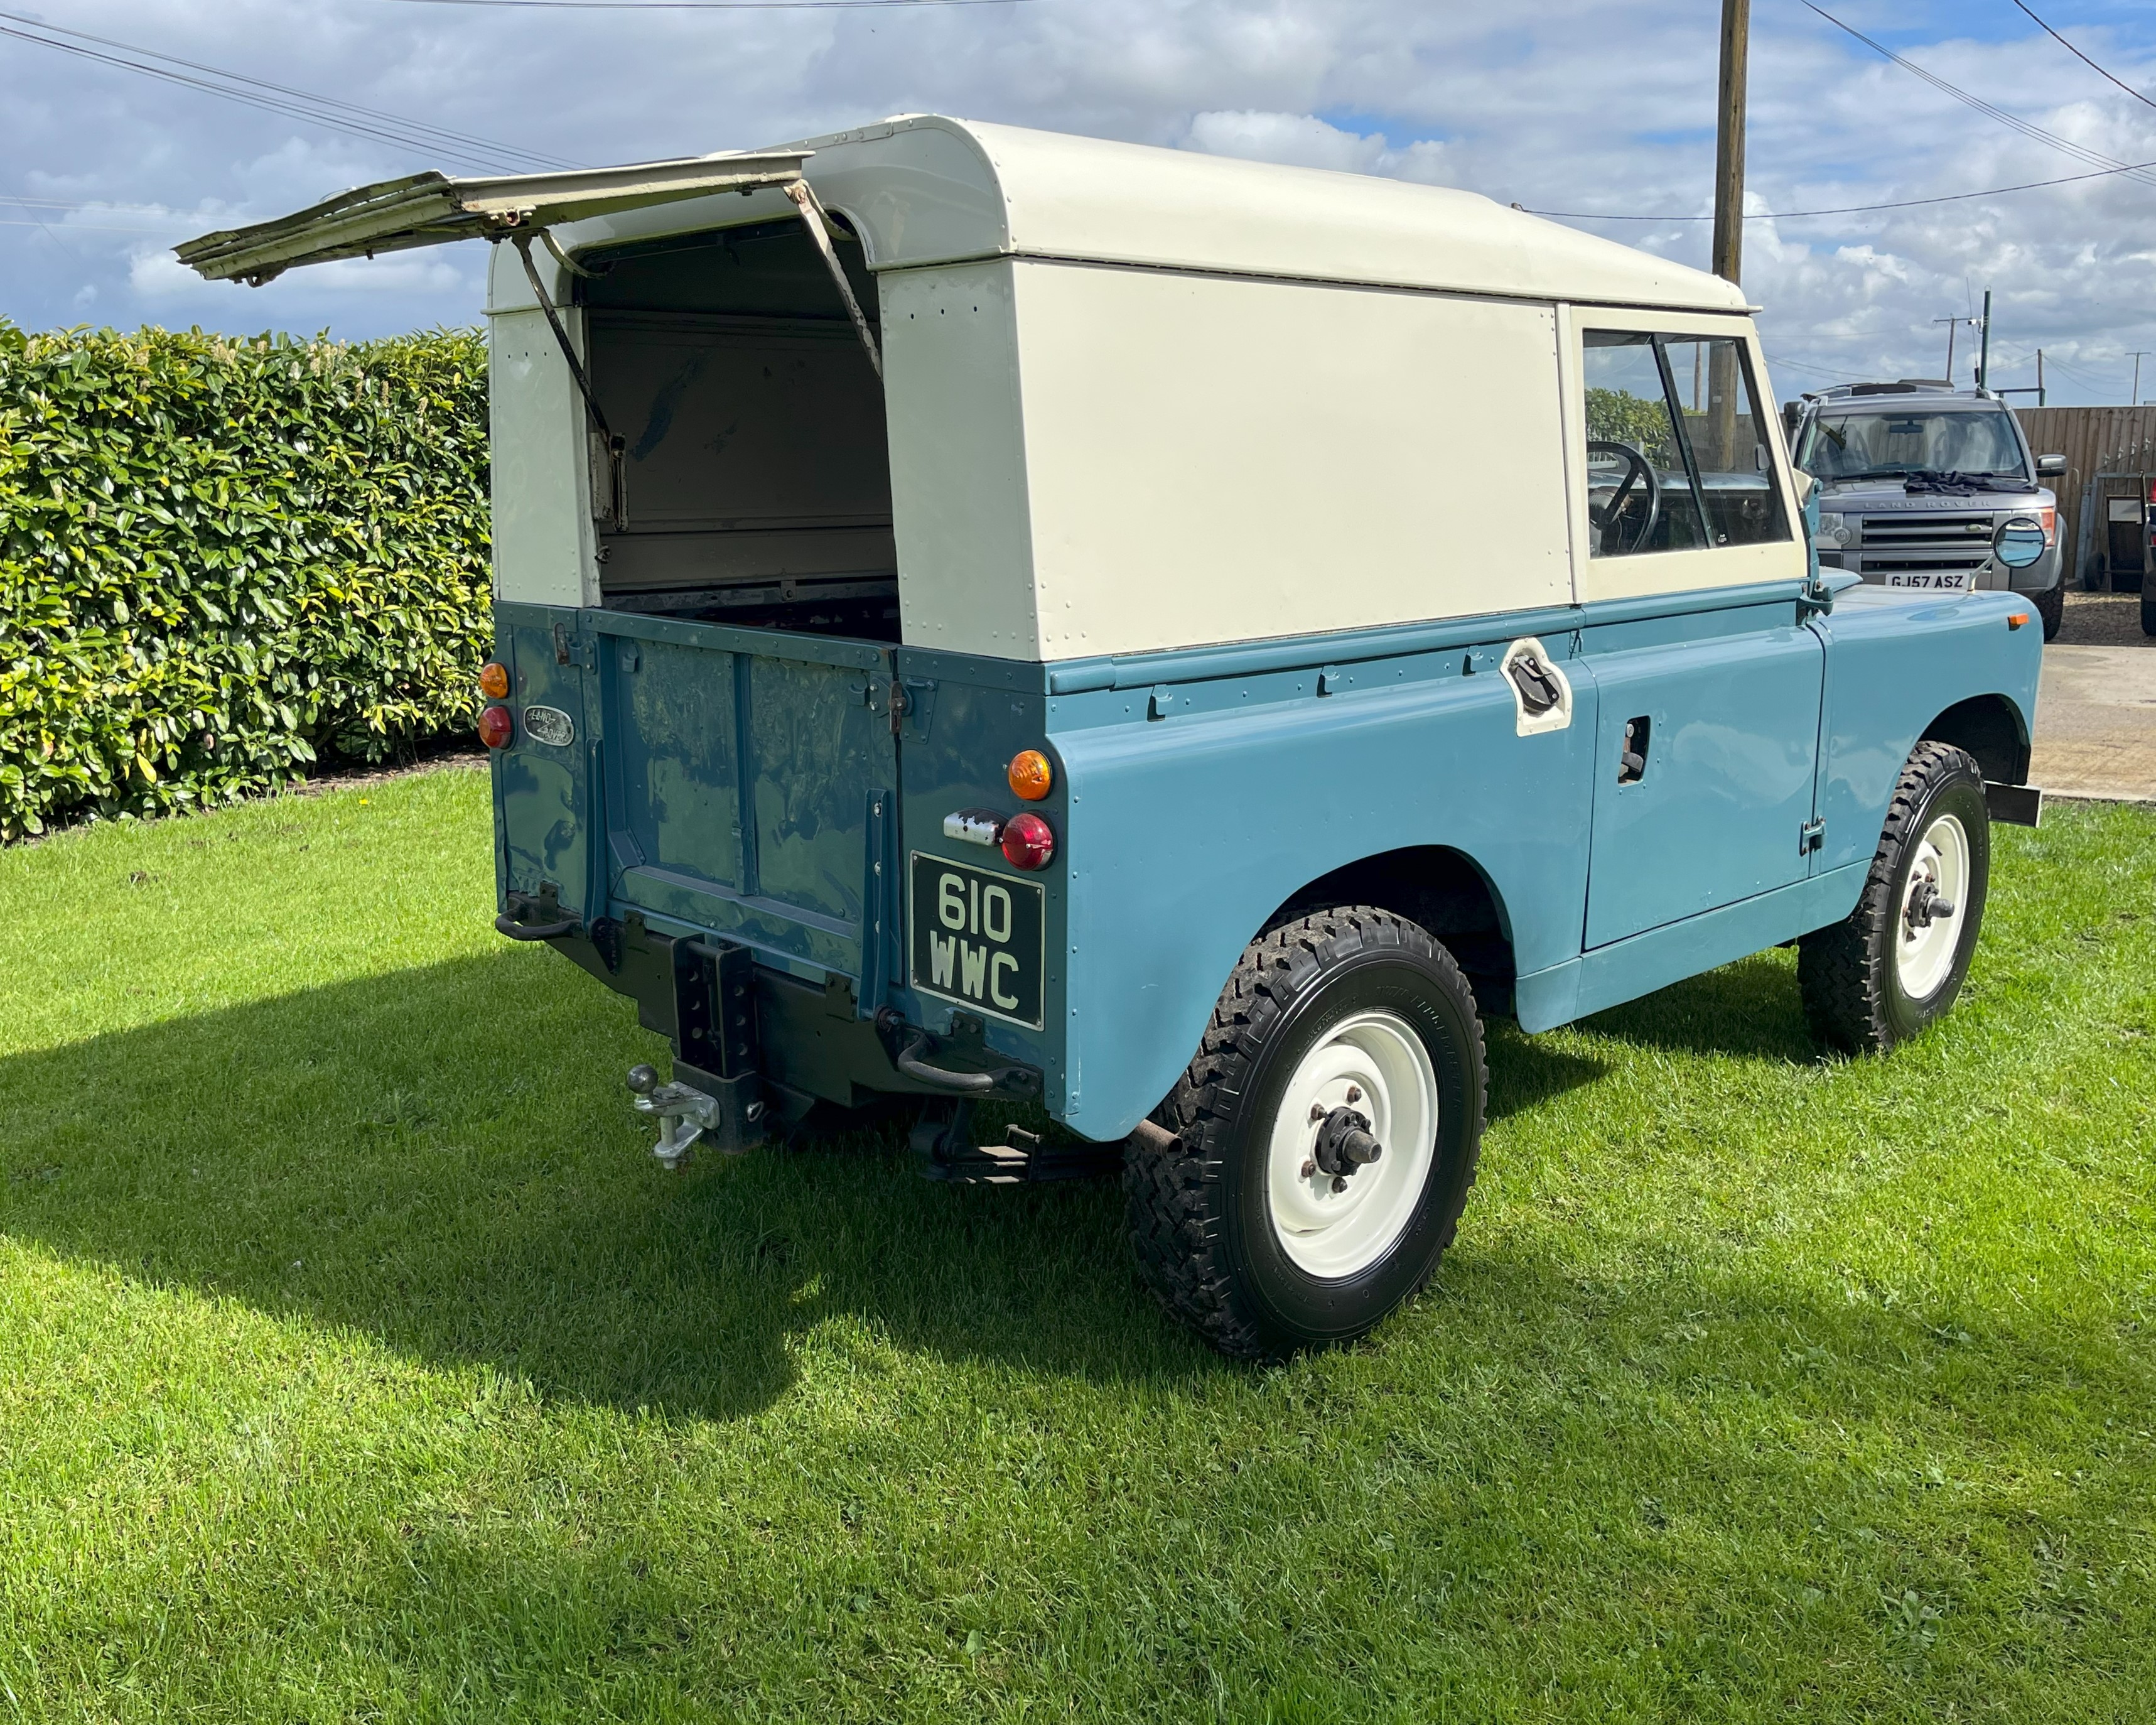 1962 Land Rover 88 Series II, petrol 2.25 litre engine, blue with 64,078 showing on the milometer, - Image 7 of 14